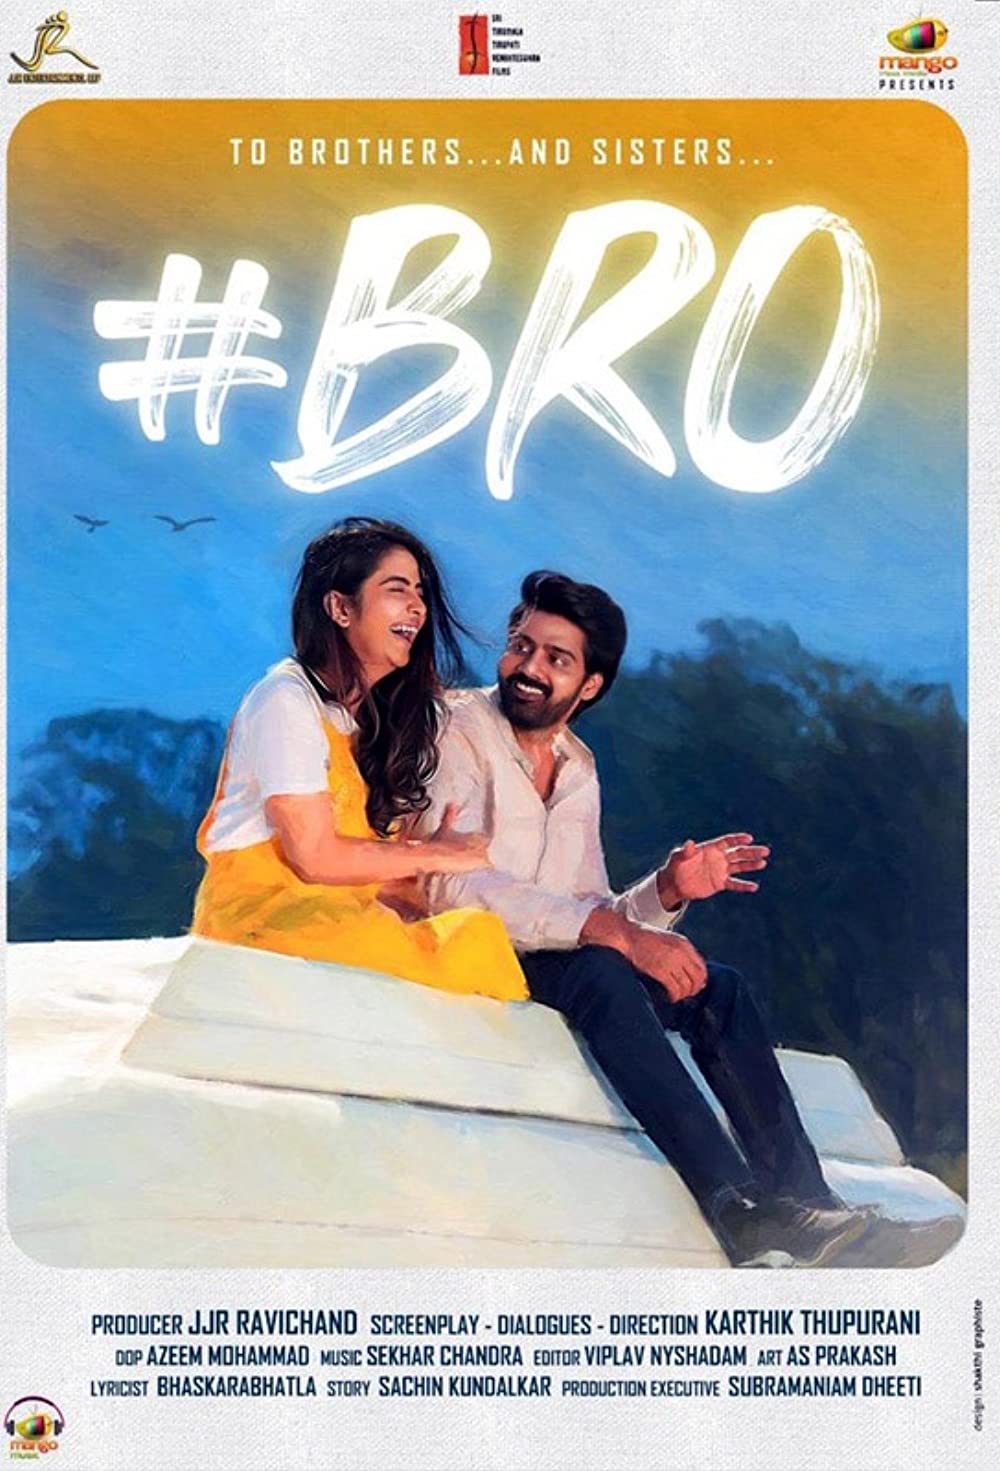 Bro 2021 Hindi Dubbed (Unofficial) 1080p HDRip 2GB Download